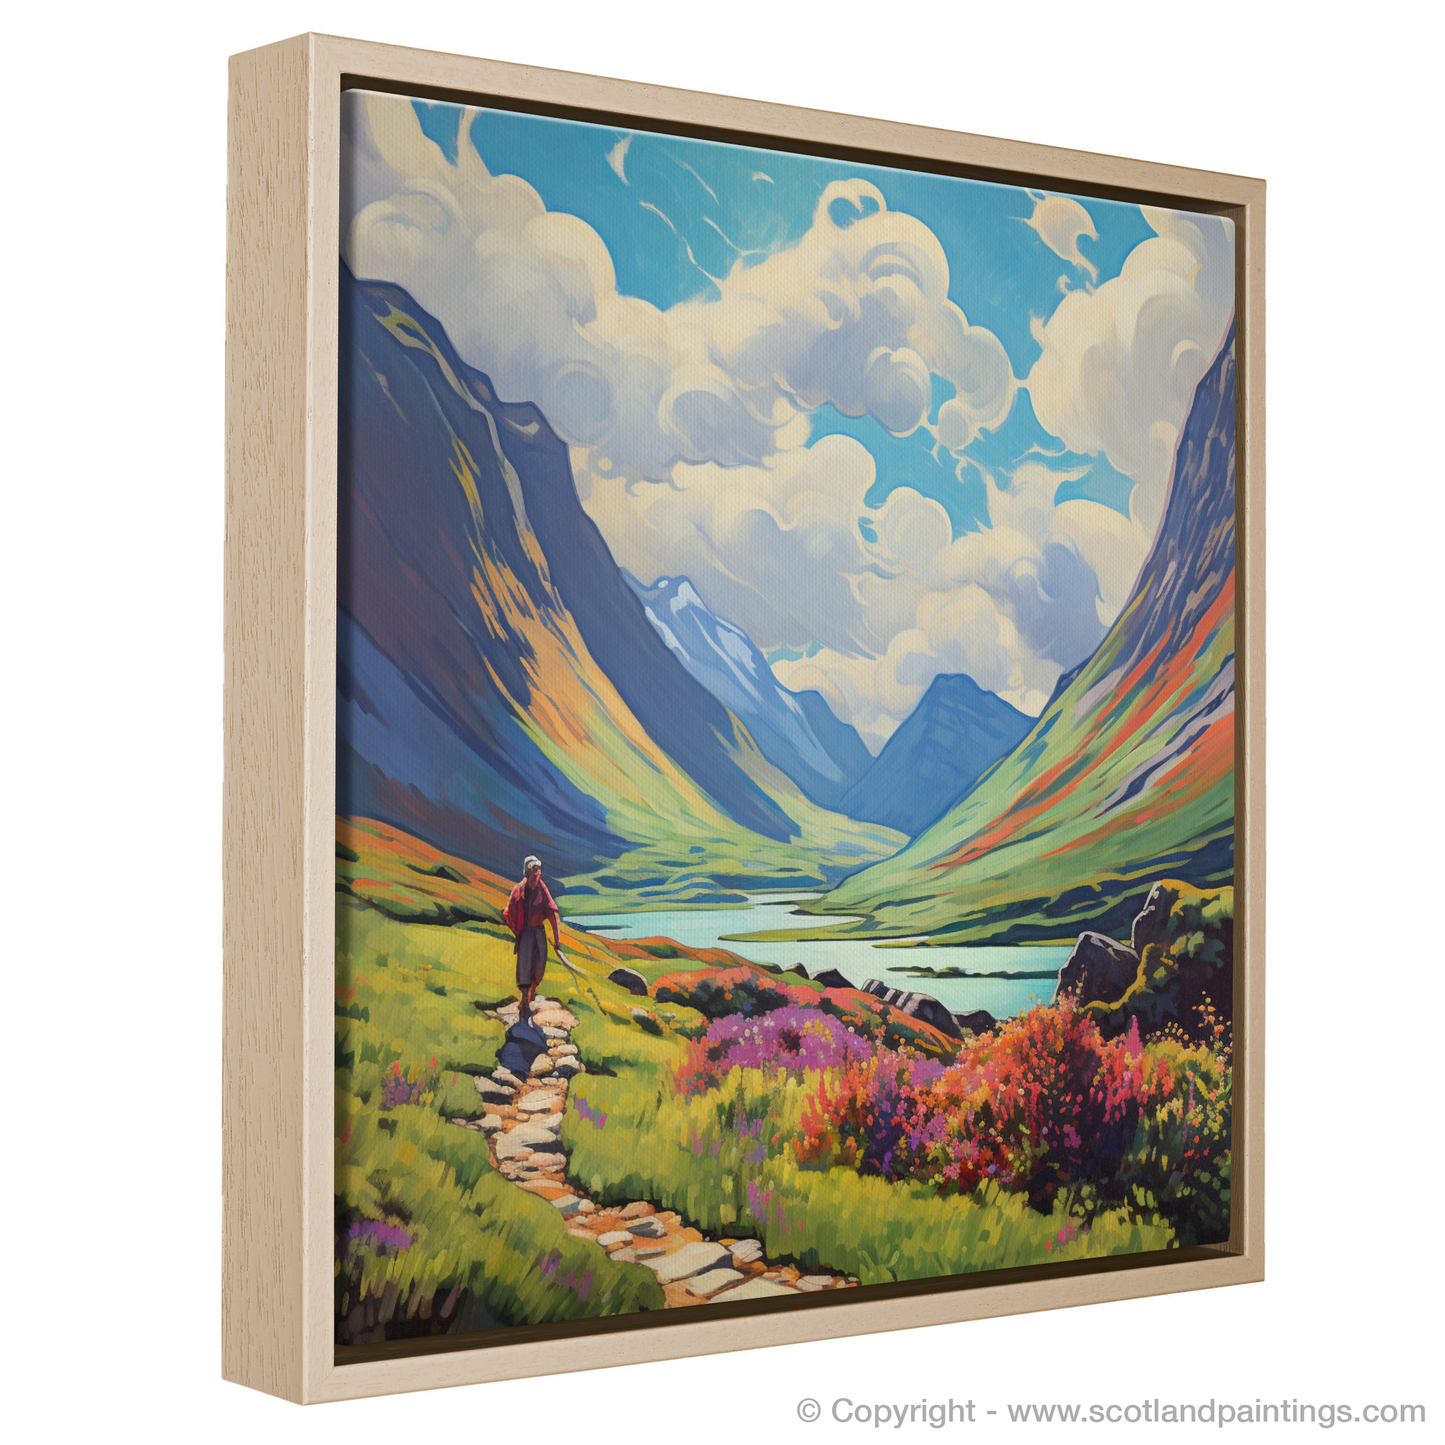 Painting and Art Print of Lone hiker in Glencoe during summer entitled "Summer Solitude in Glencoe: A Hiker's Impressionist Journey".